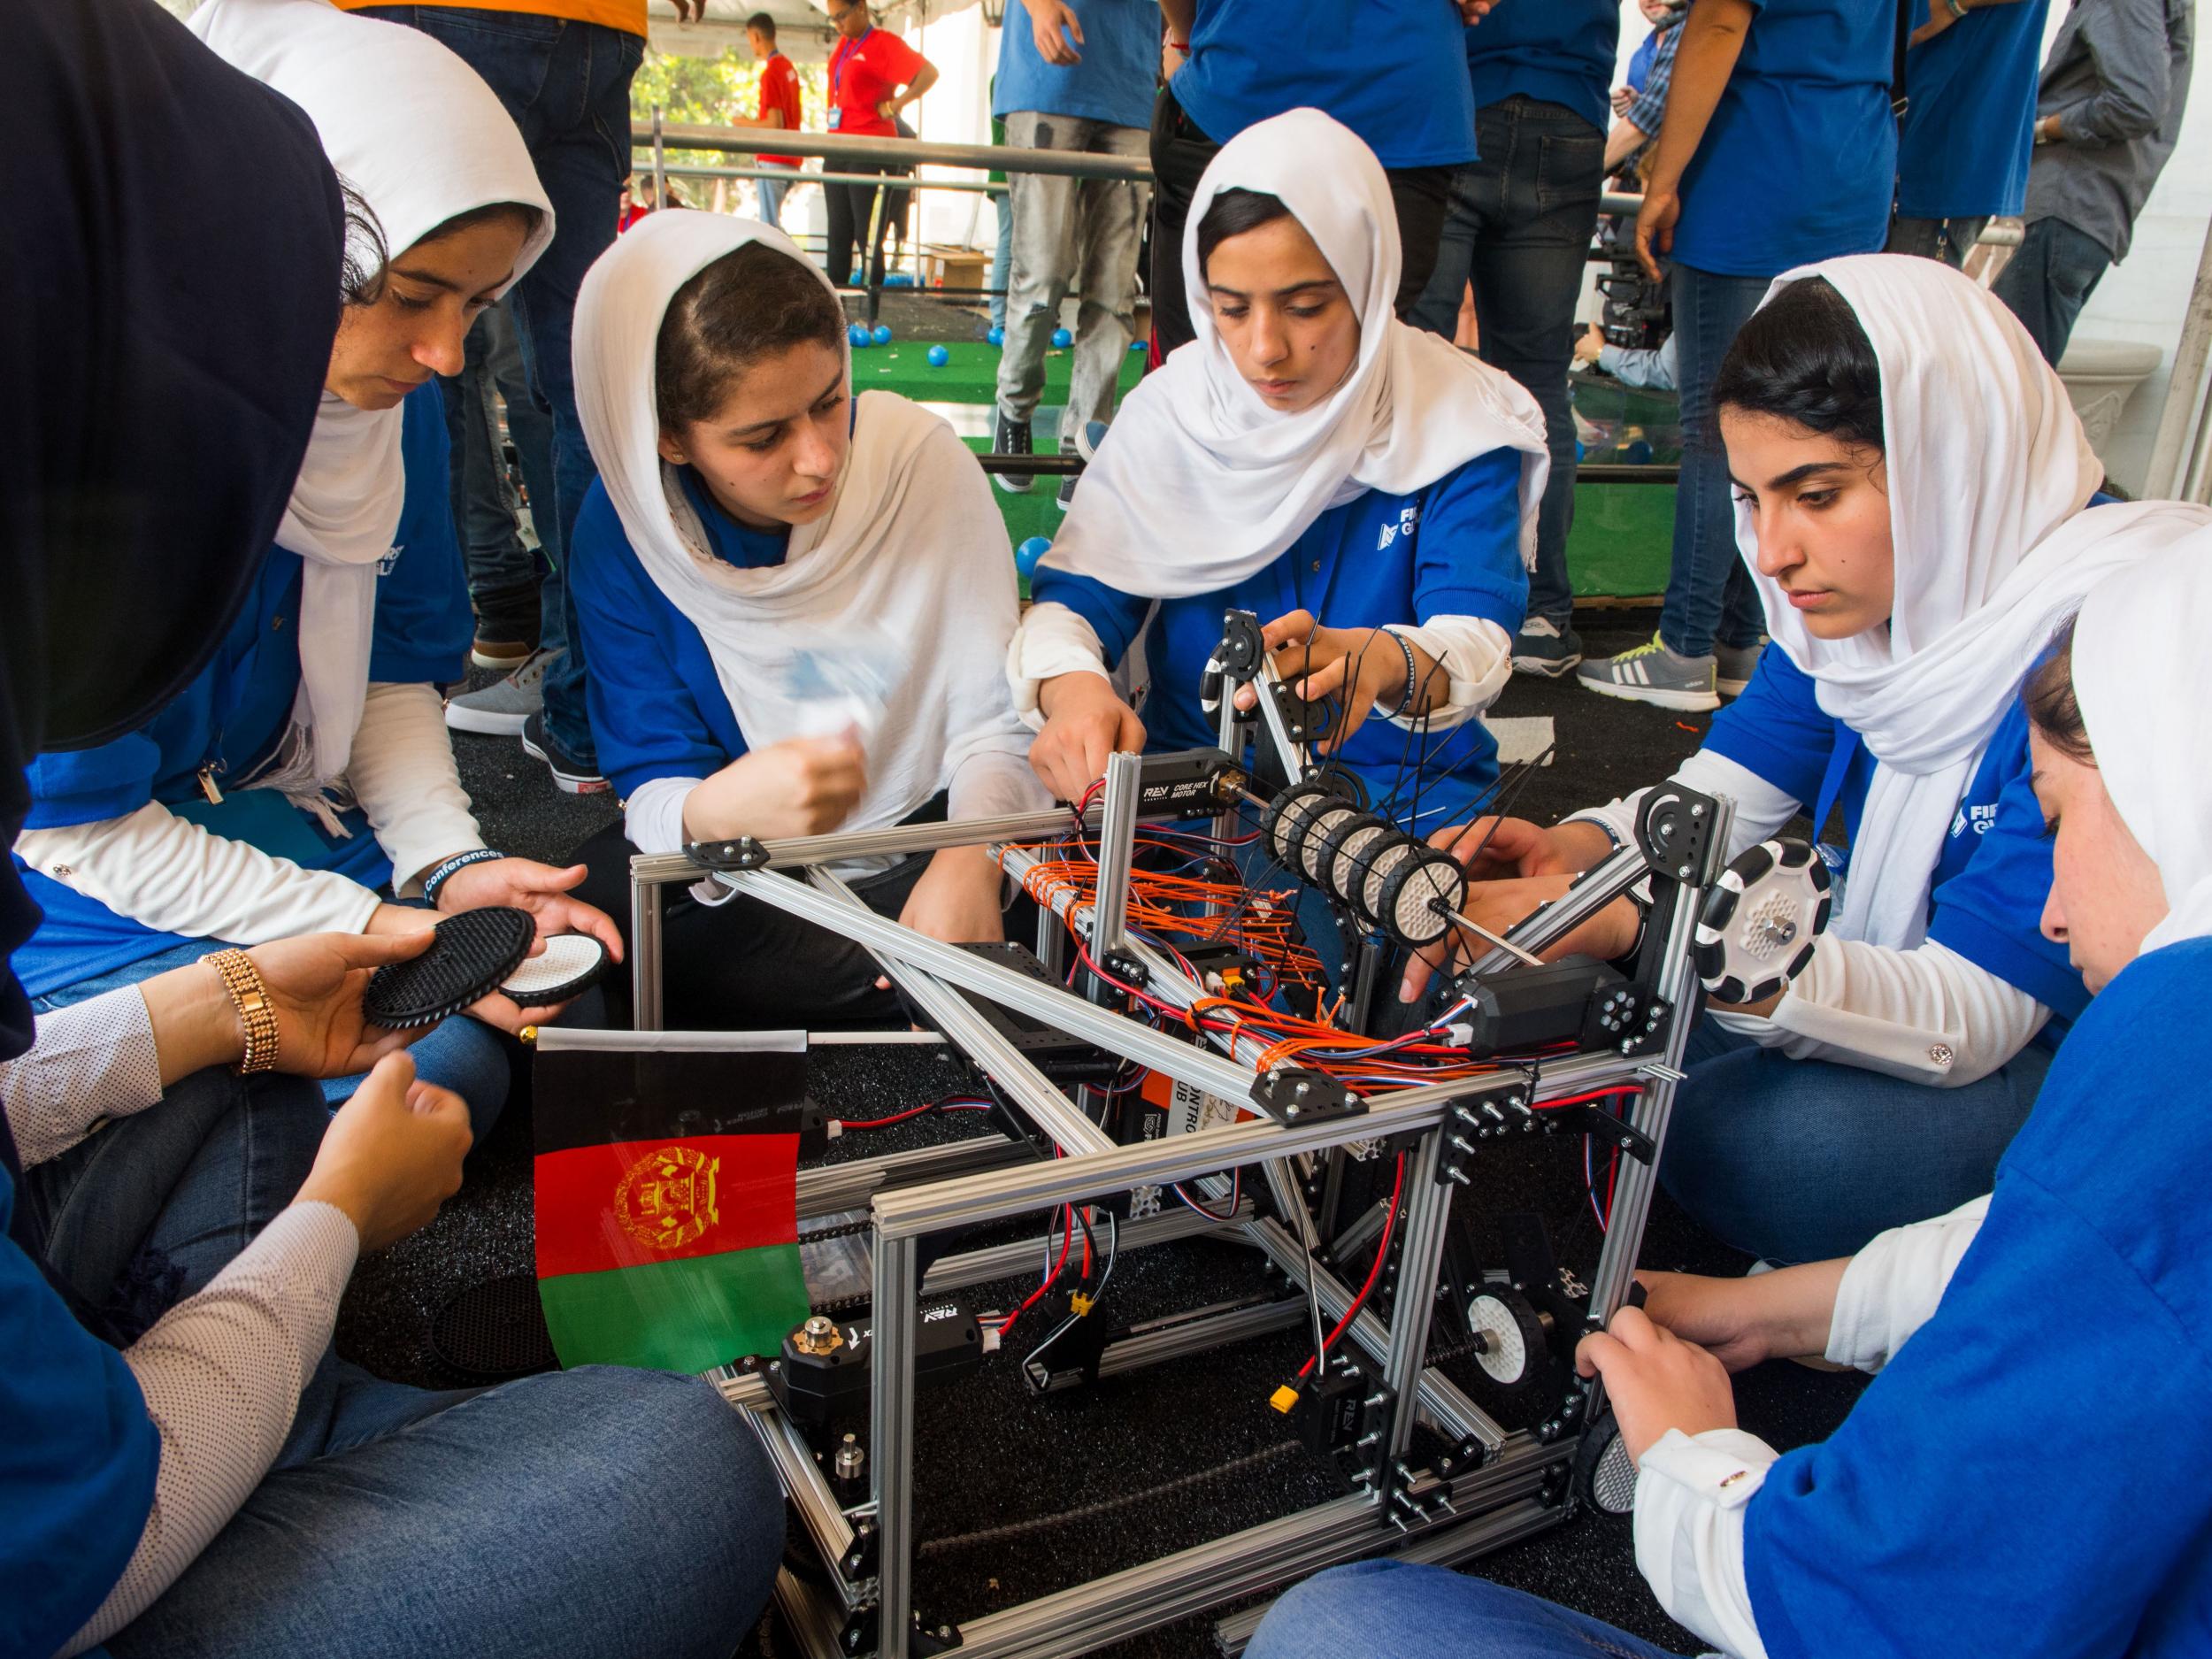 Members of the Afghan all-girls robotics team make adjustments to the team robot in the practice area on July 17, 2017